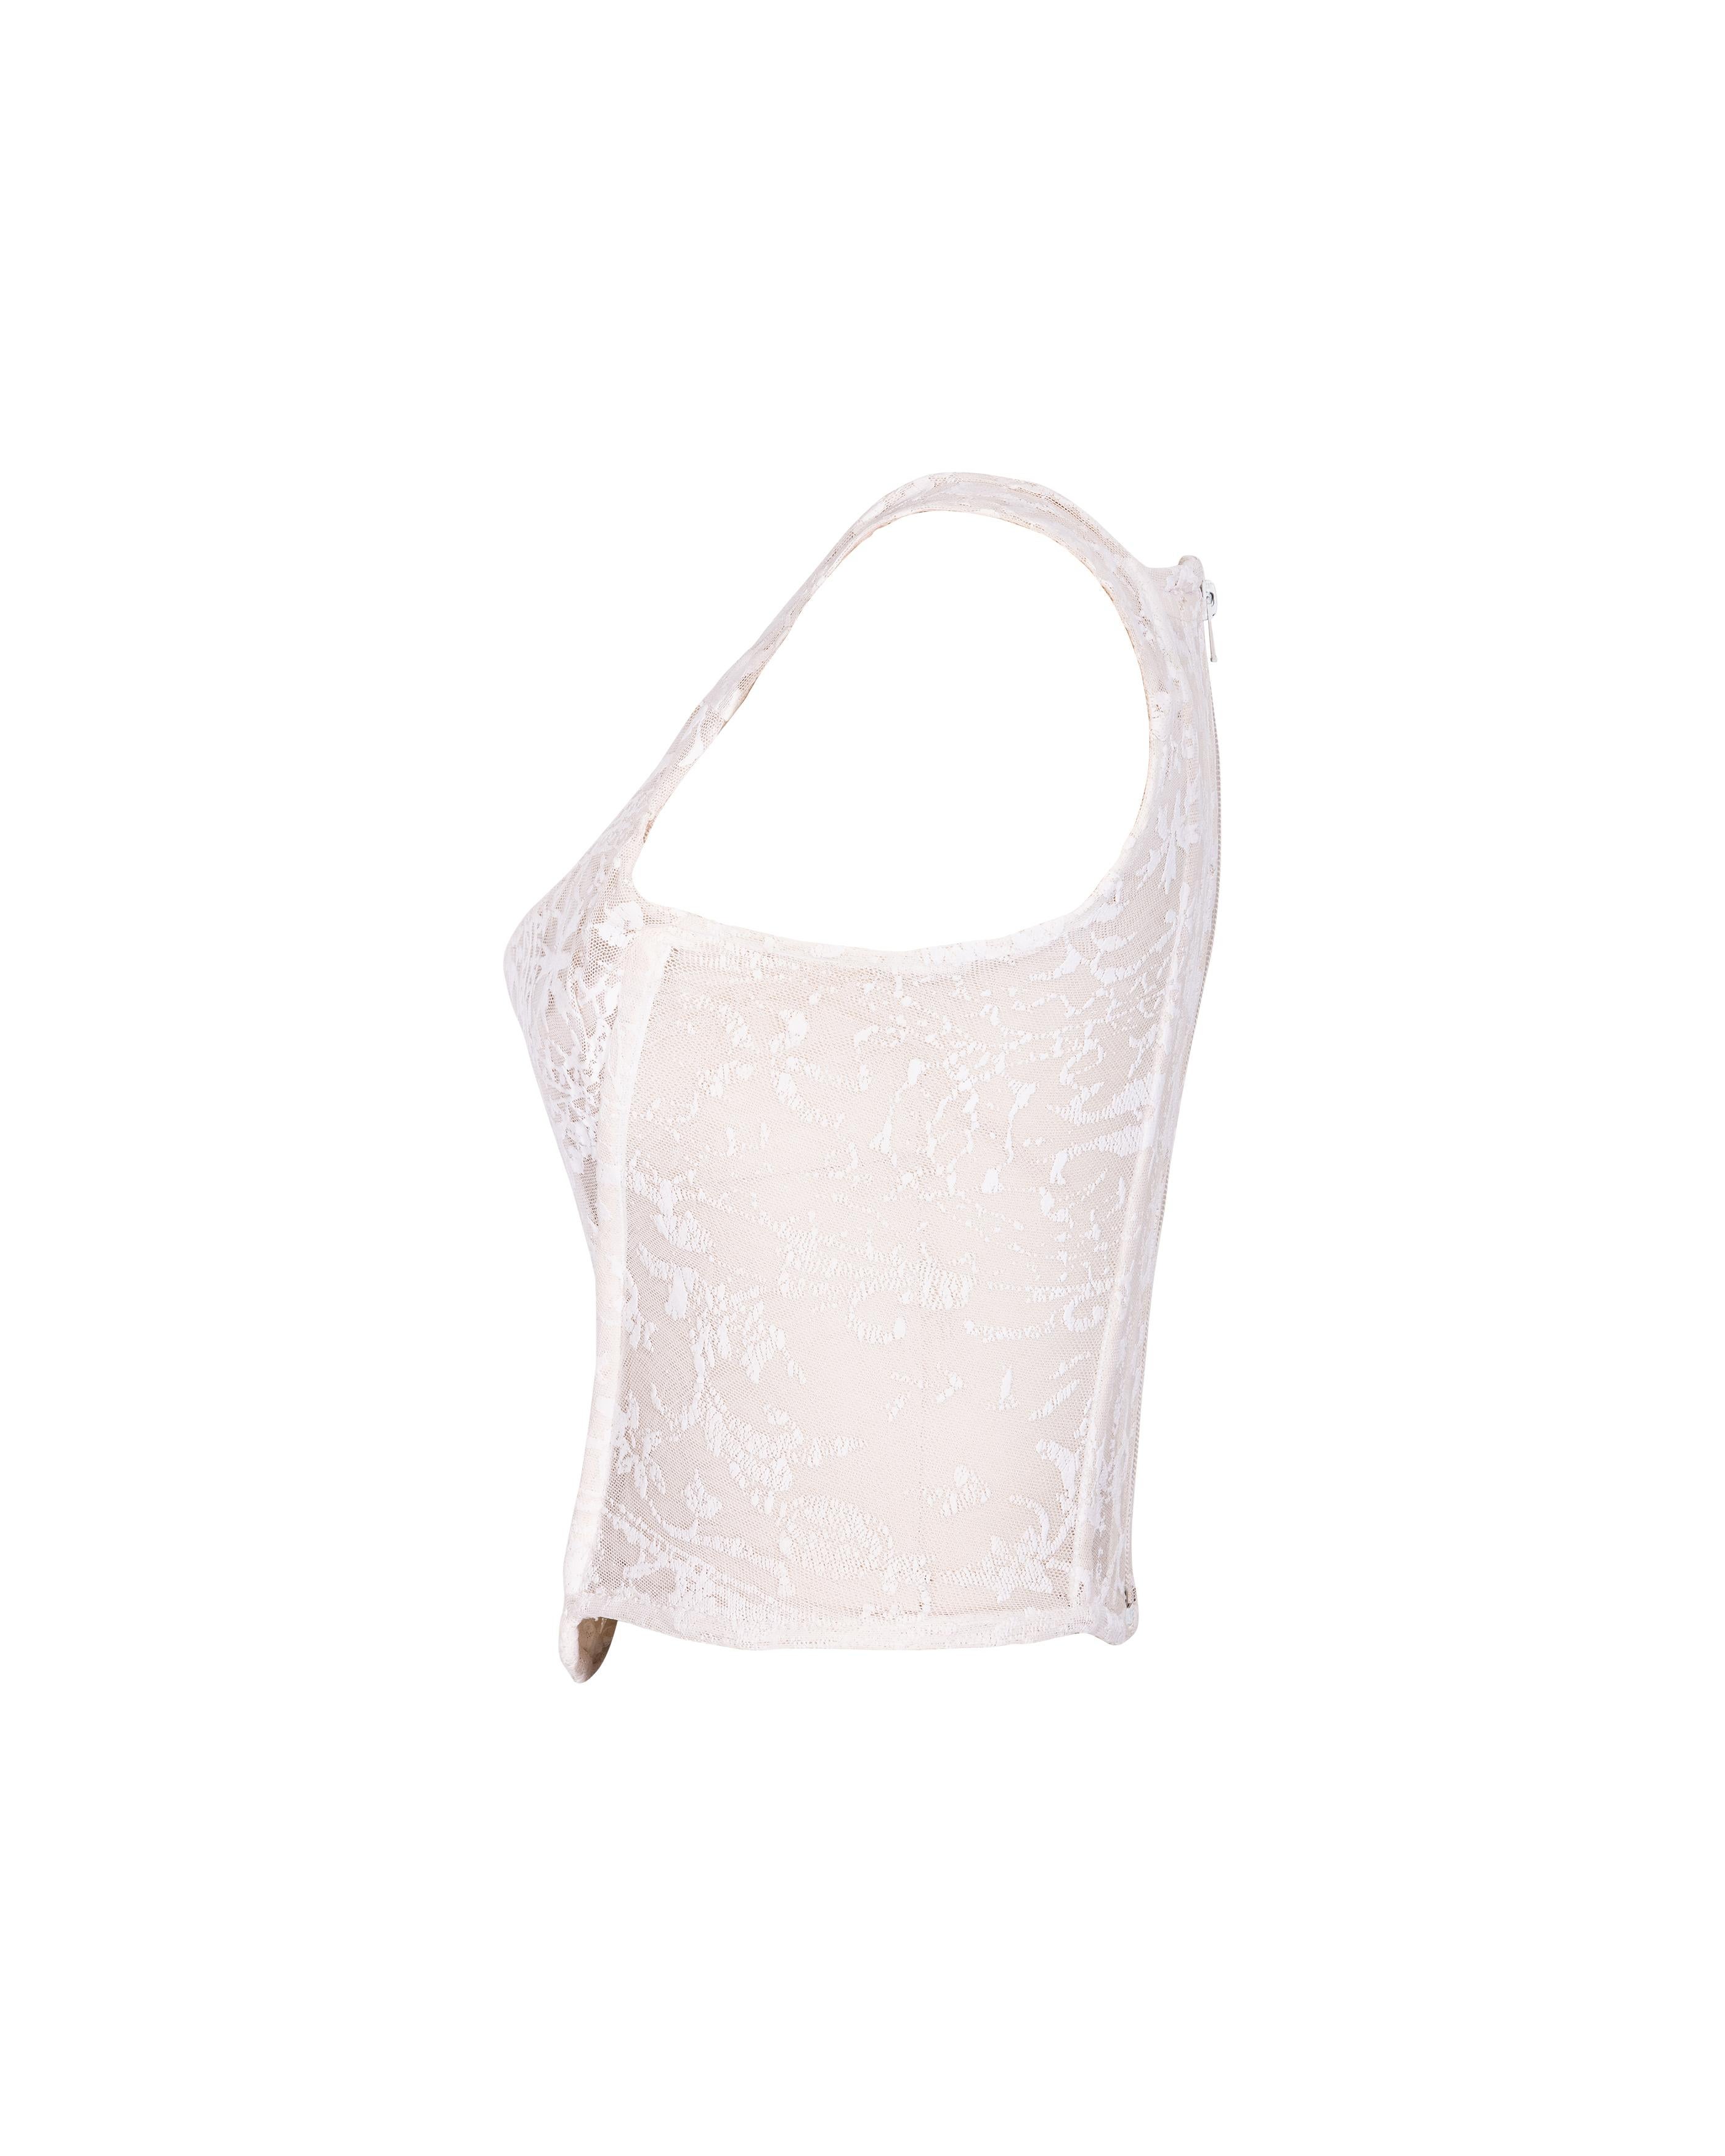 A/W 1992 Vivienne Westwood ecru lace corset. Boned corset with Hapsburg lace layered over nude mesh. Center back zip closure. Similar seen on Naomi Campbell on the runway. In very good vintage condition with light wear throughout; has been taken to